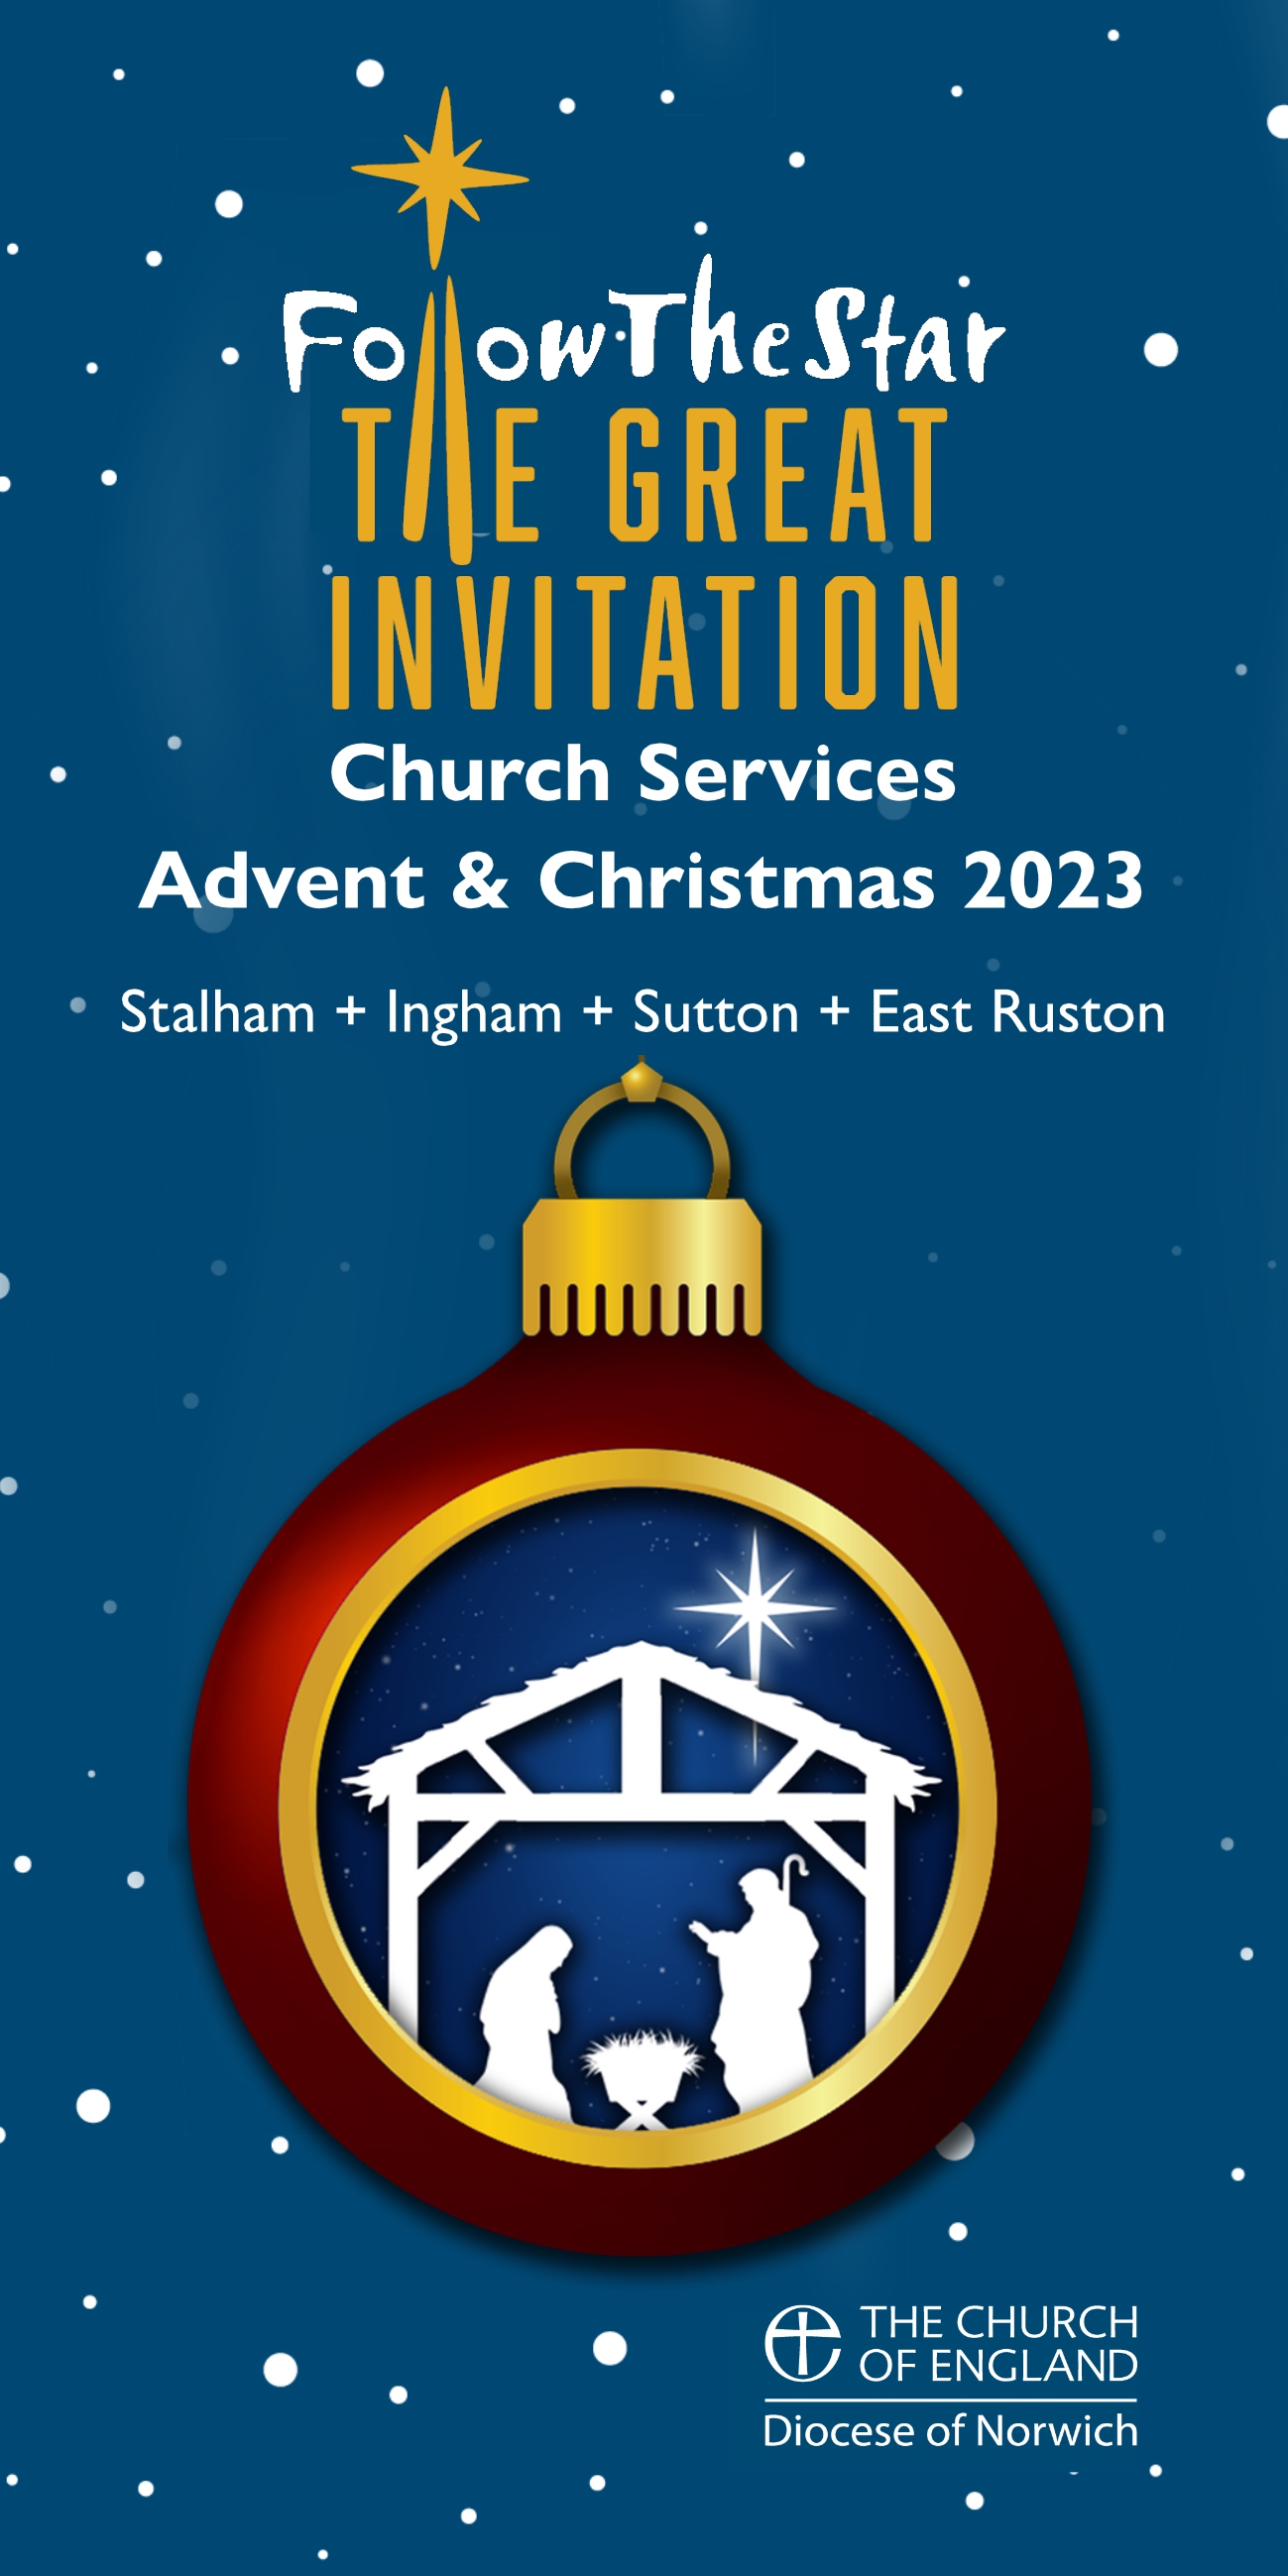 Advent and Christmas Services in the Benefice